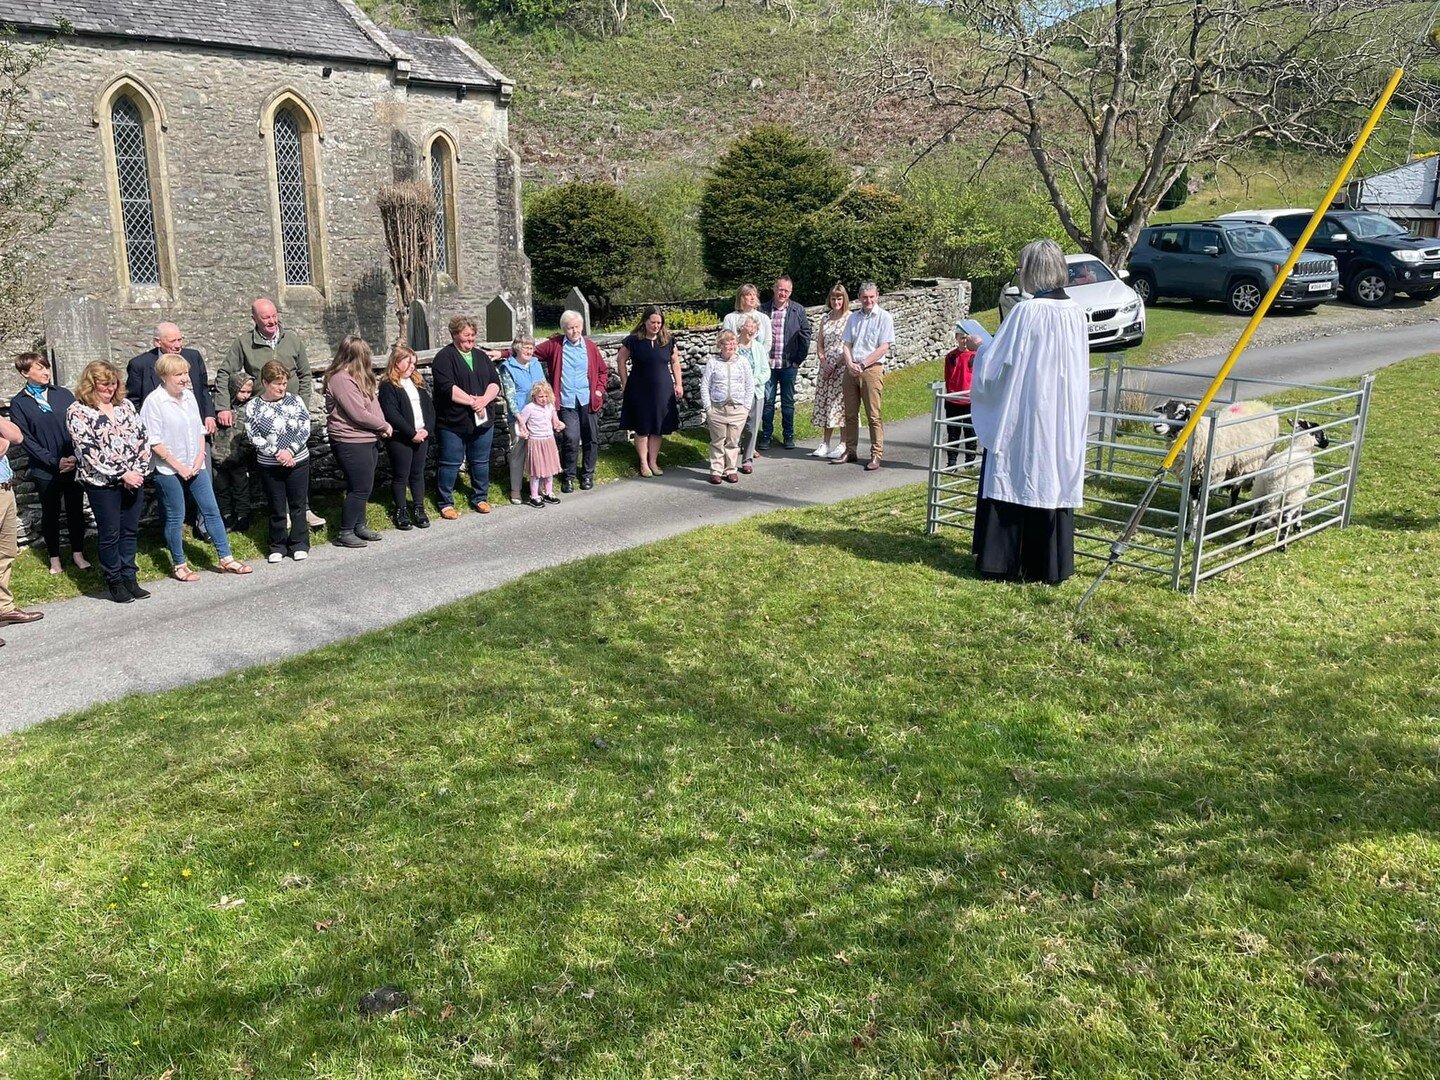 Good turnout for our lambing services at Howgill and Cowgill on Sunday